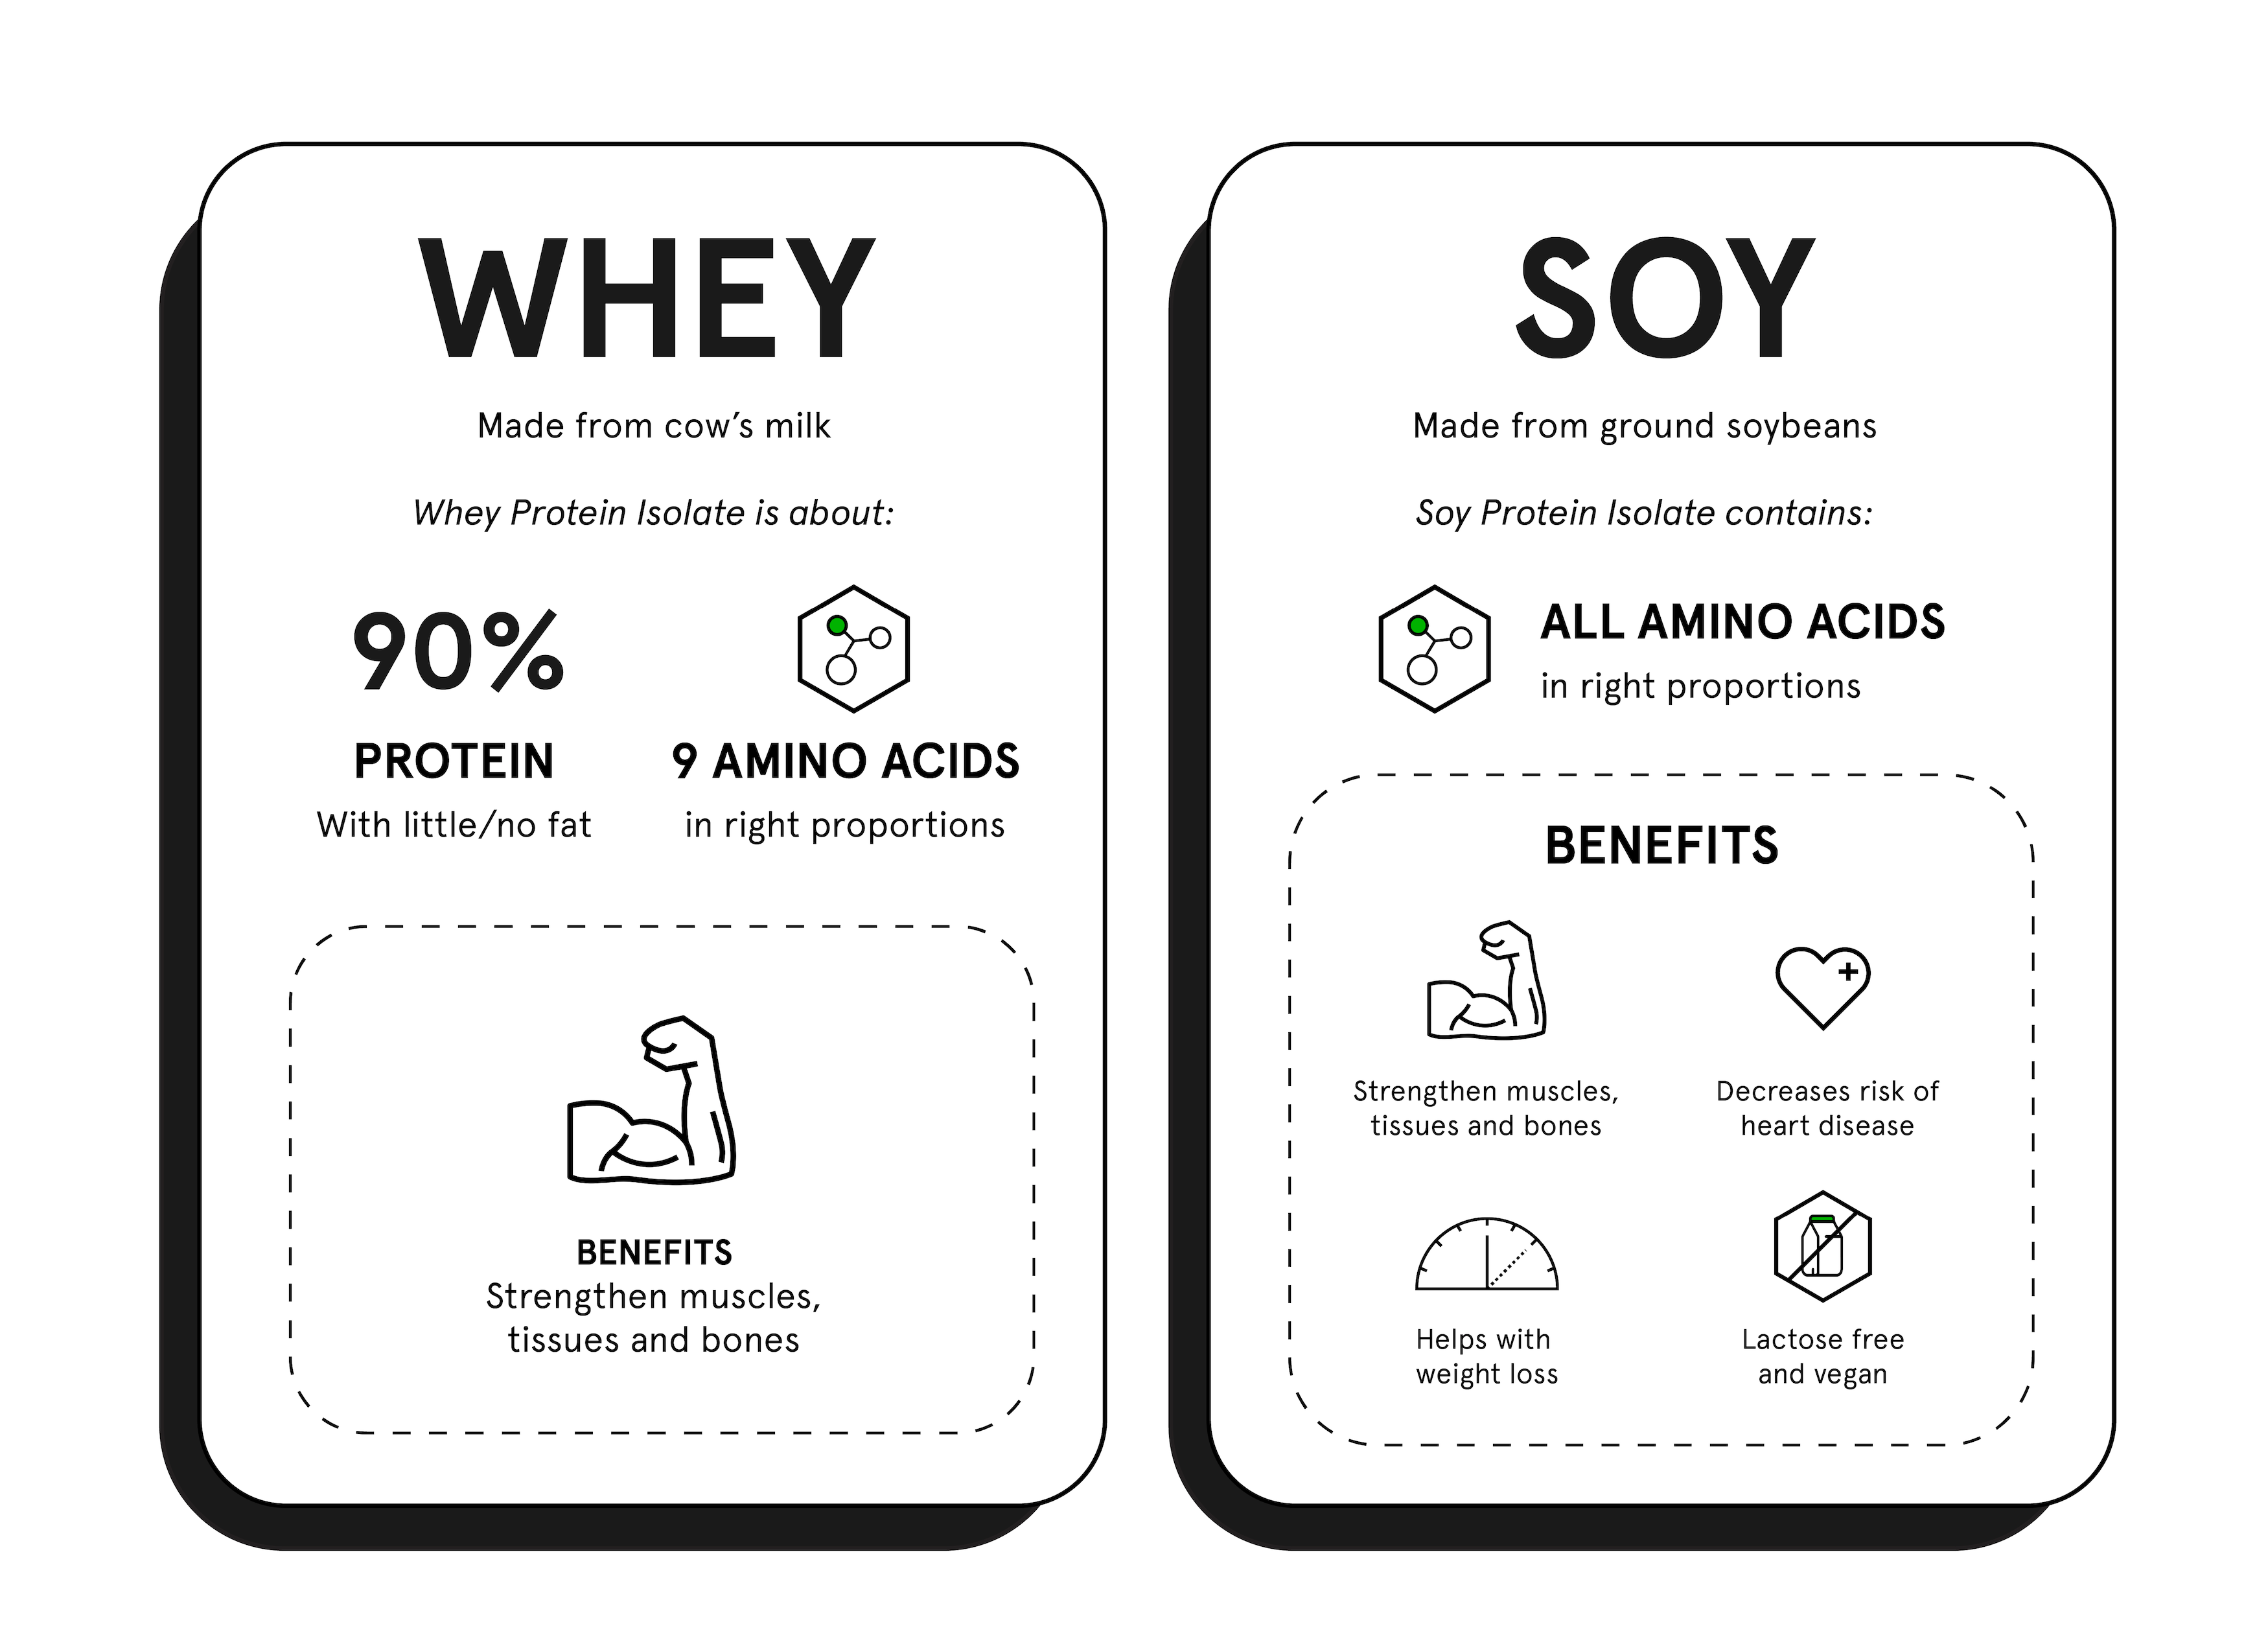 Infographic on the difference between Whey and Soy protein by Soylent